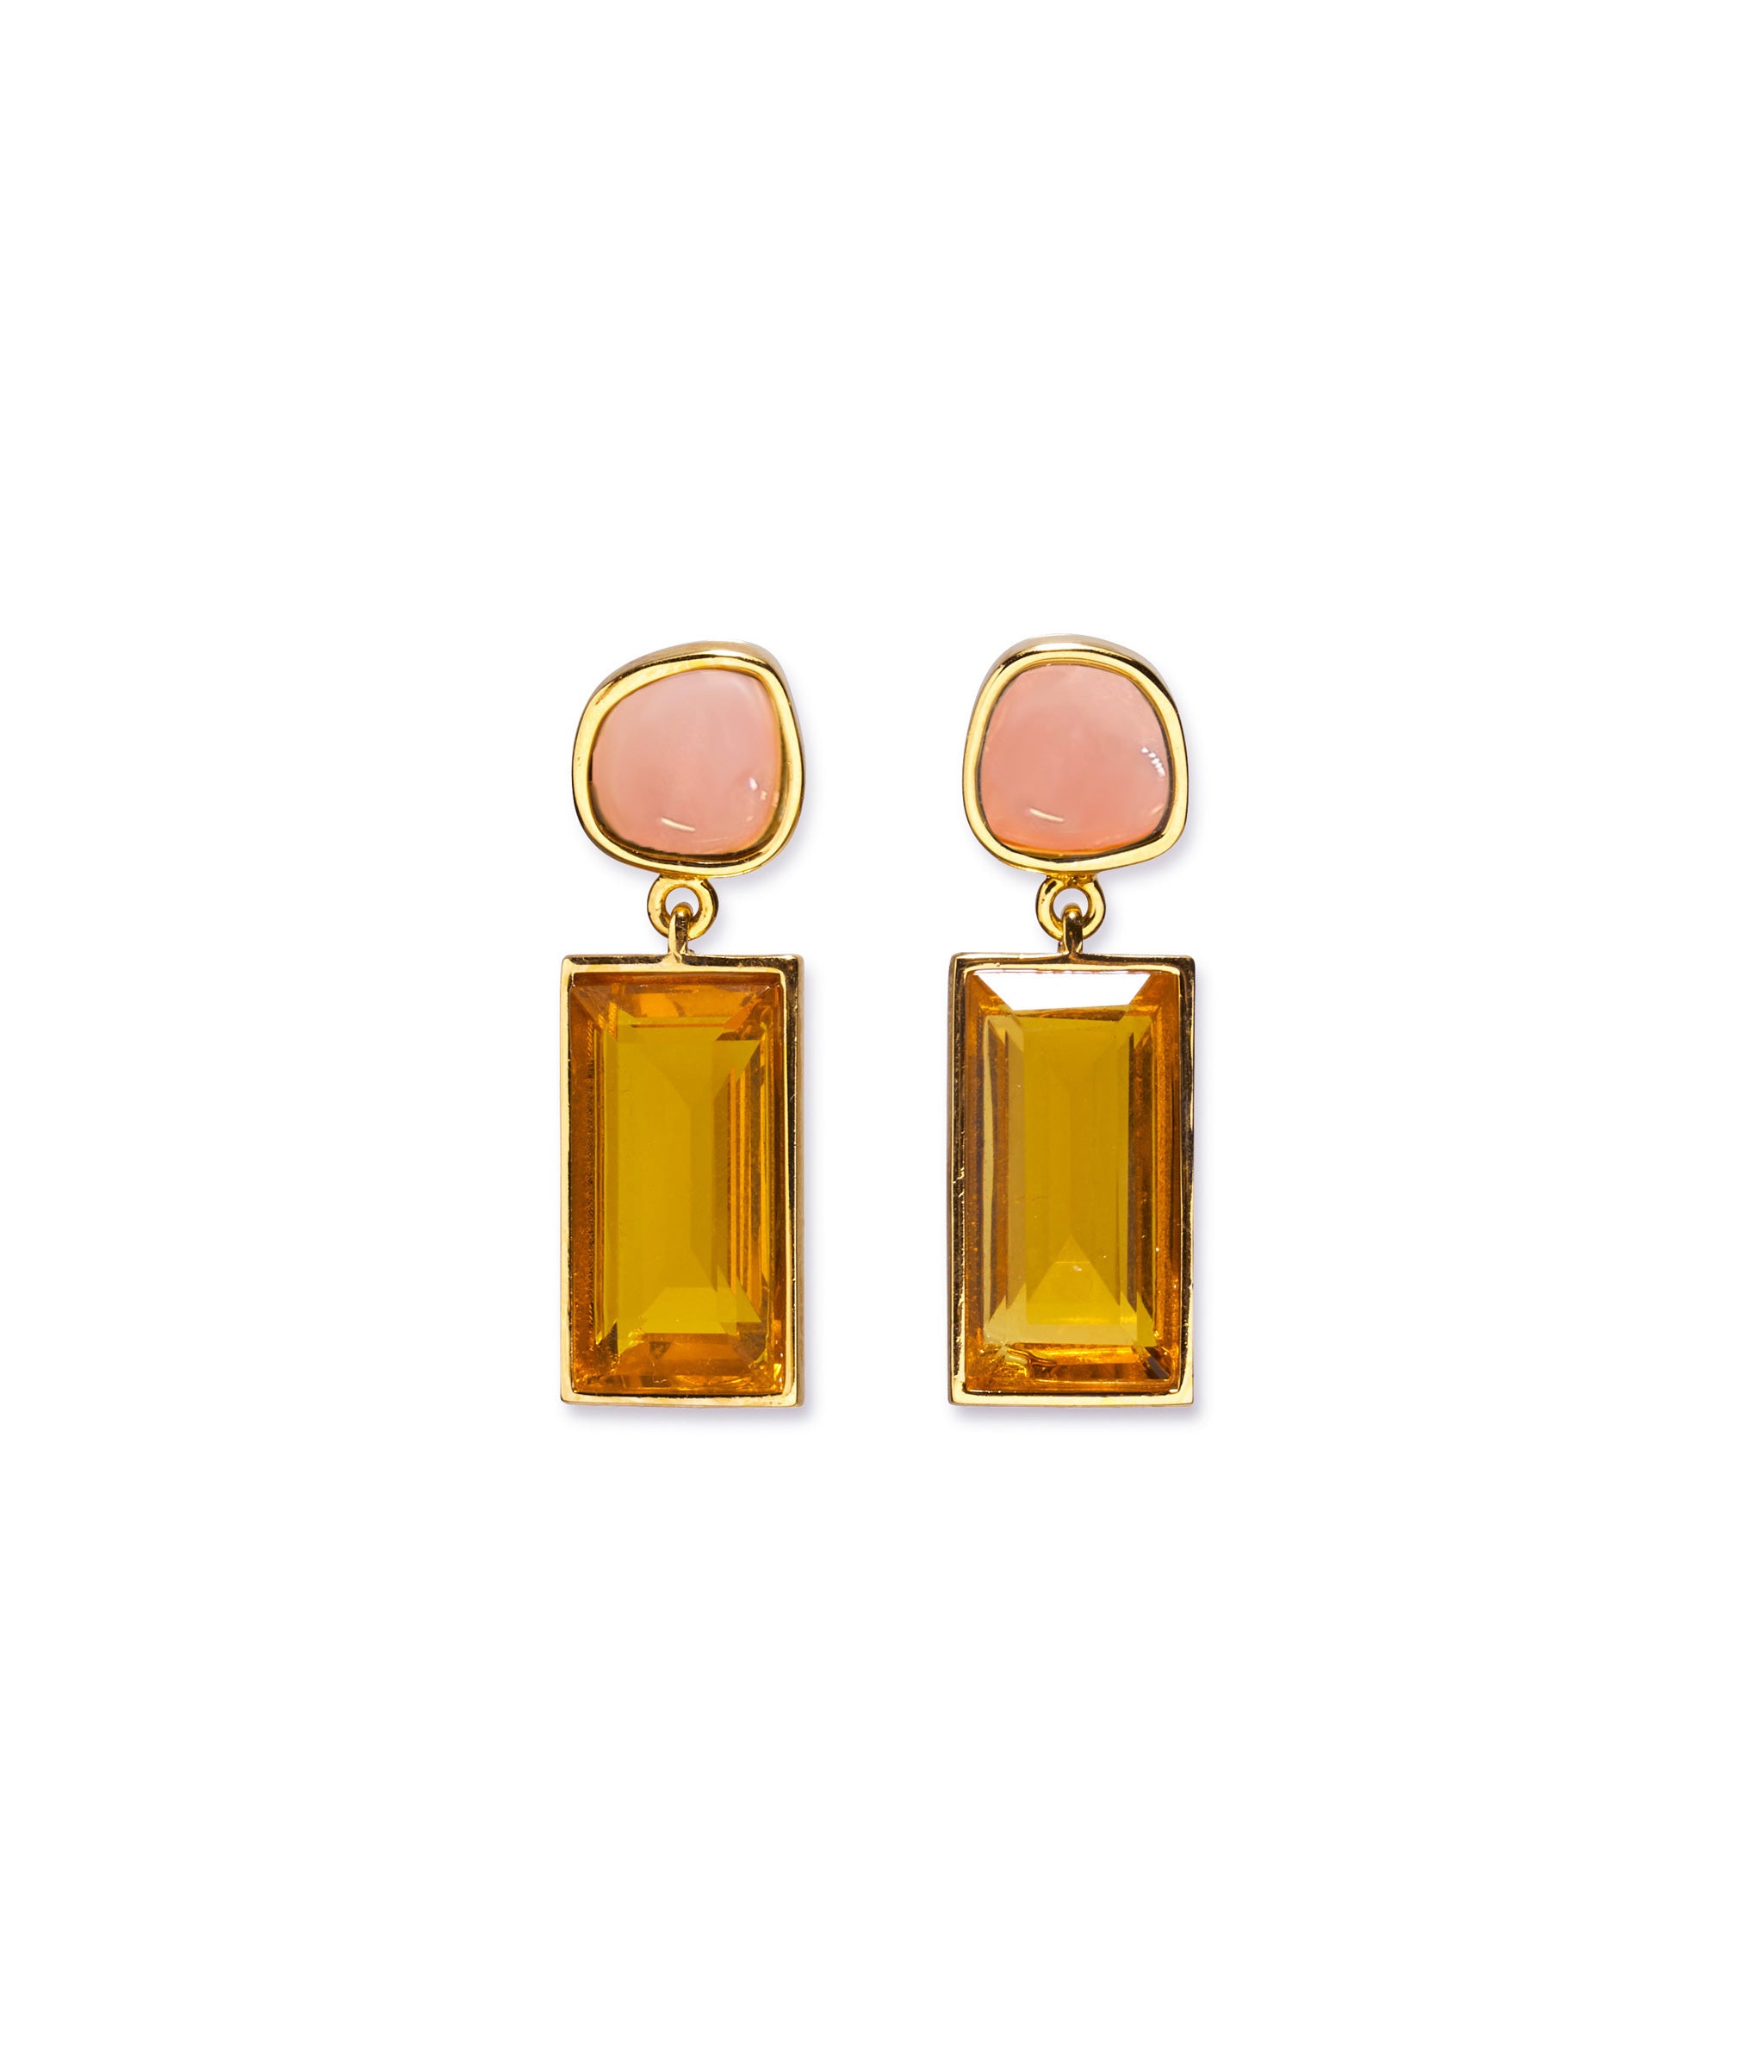 Crystal Column Earrings in Sunset. Gold-plated column earrings with pink opal tops and faceted orange quartz rectangles.